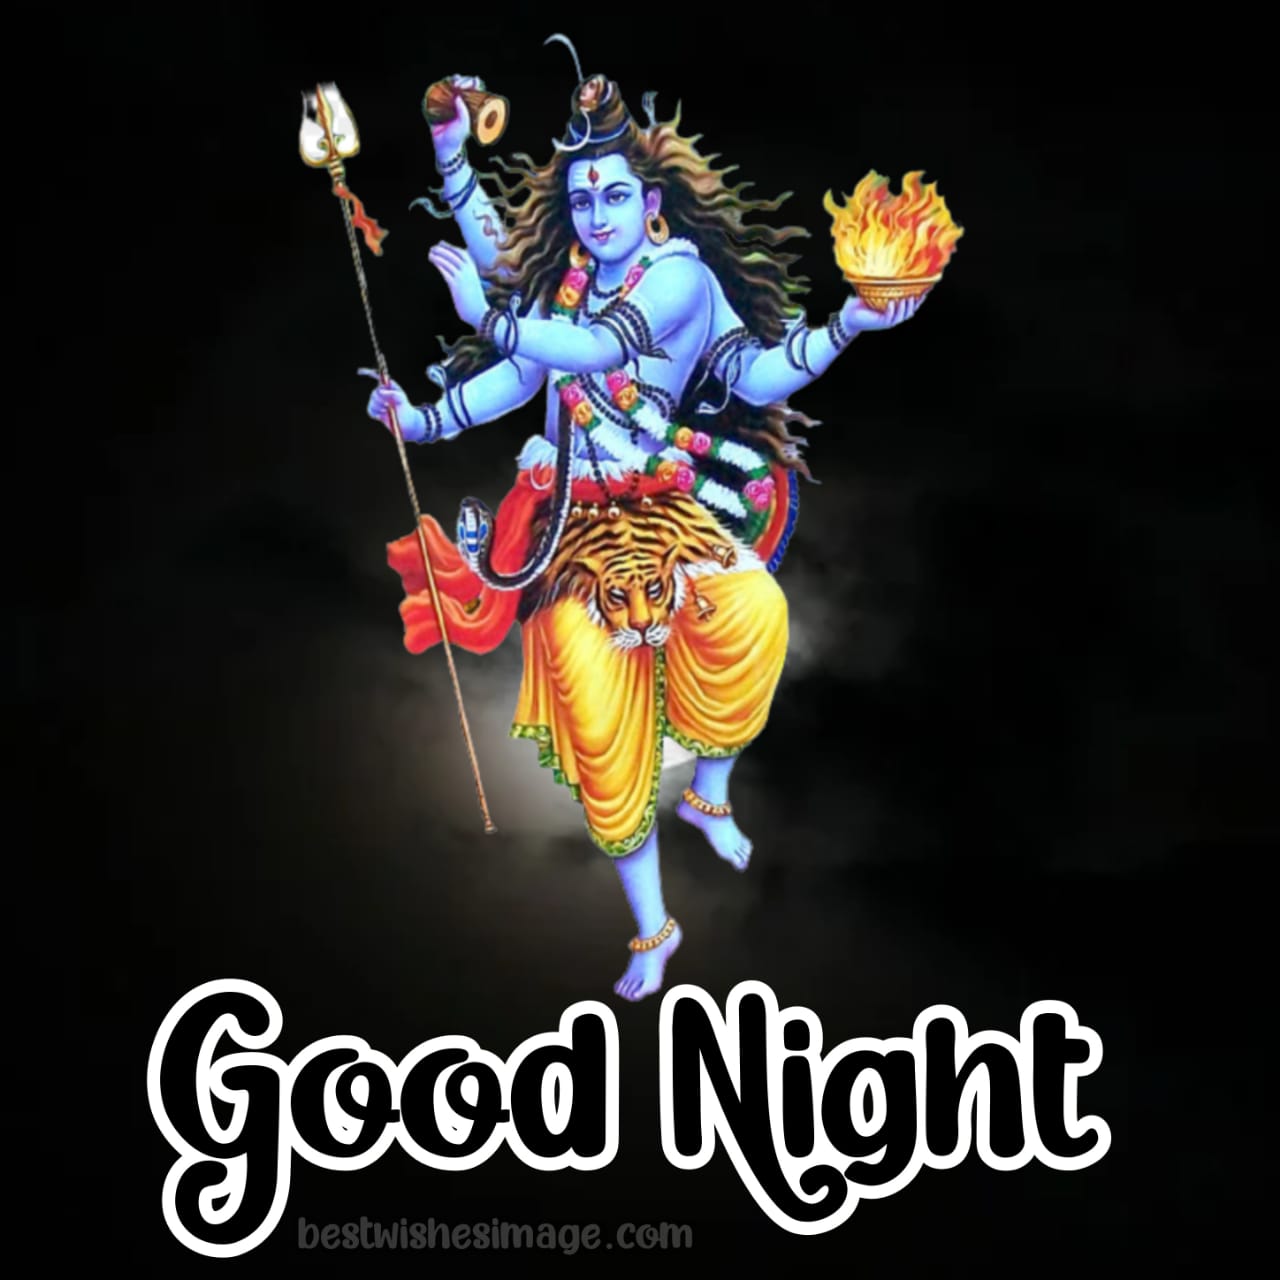 Good Night God image picture photo free download wishes image